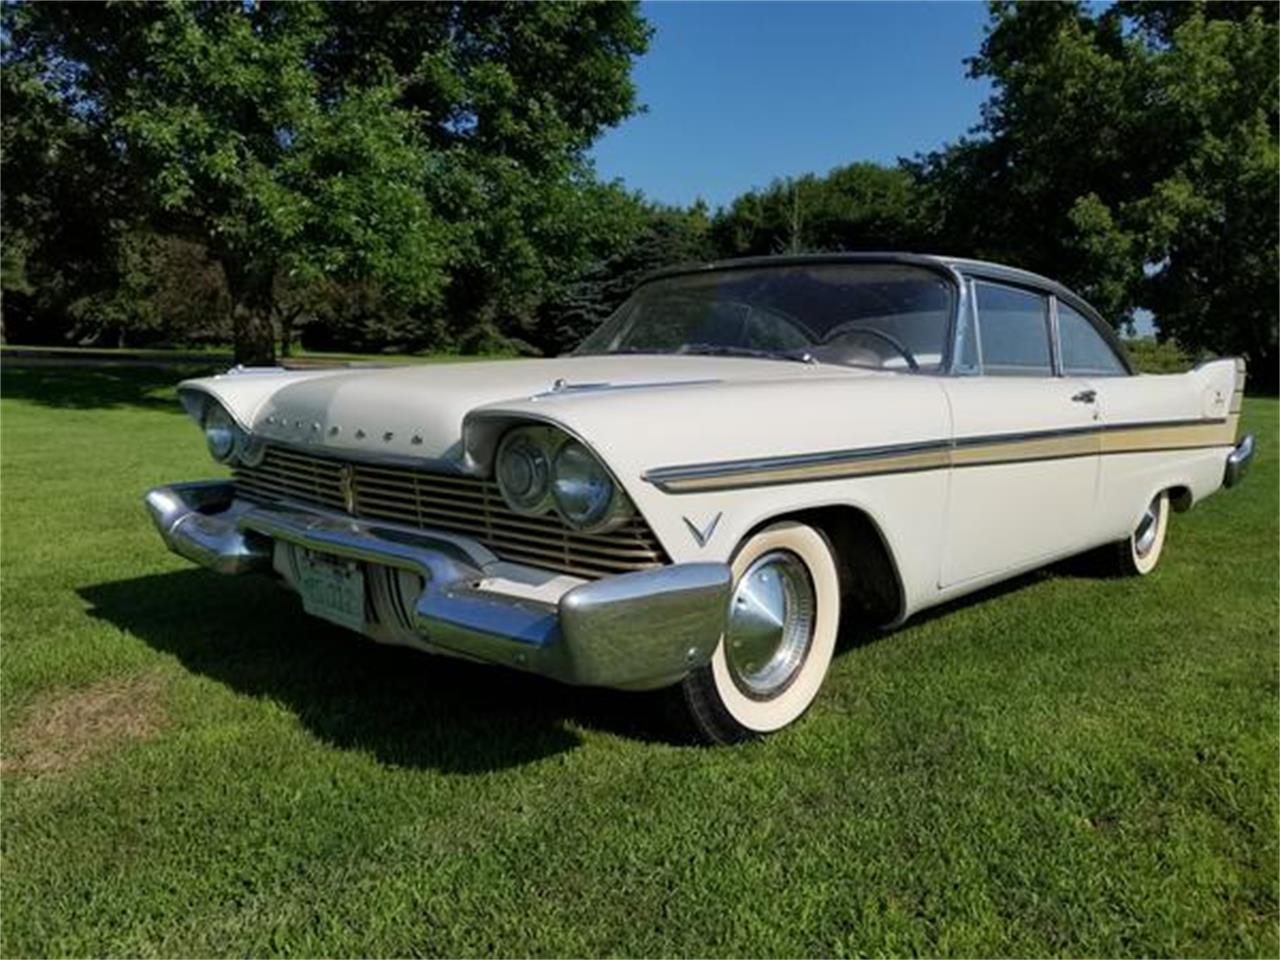 1957 Plymouth Fury For Sale In New Ulm Mn Classiccarsbay Com